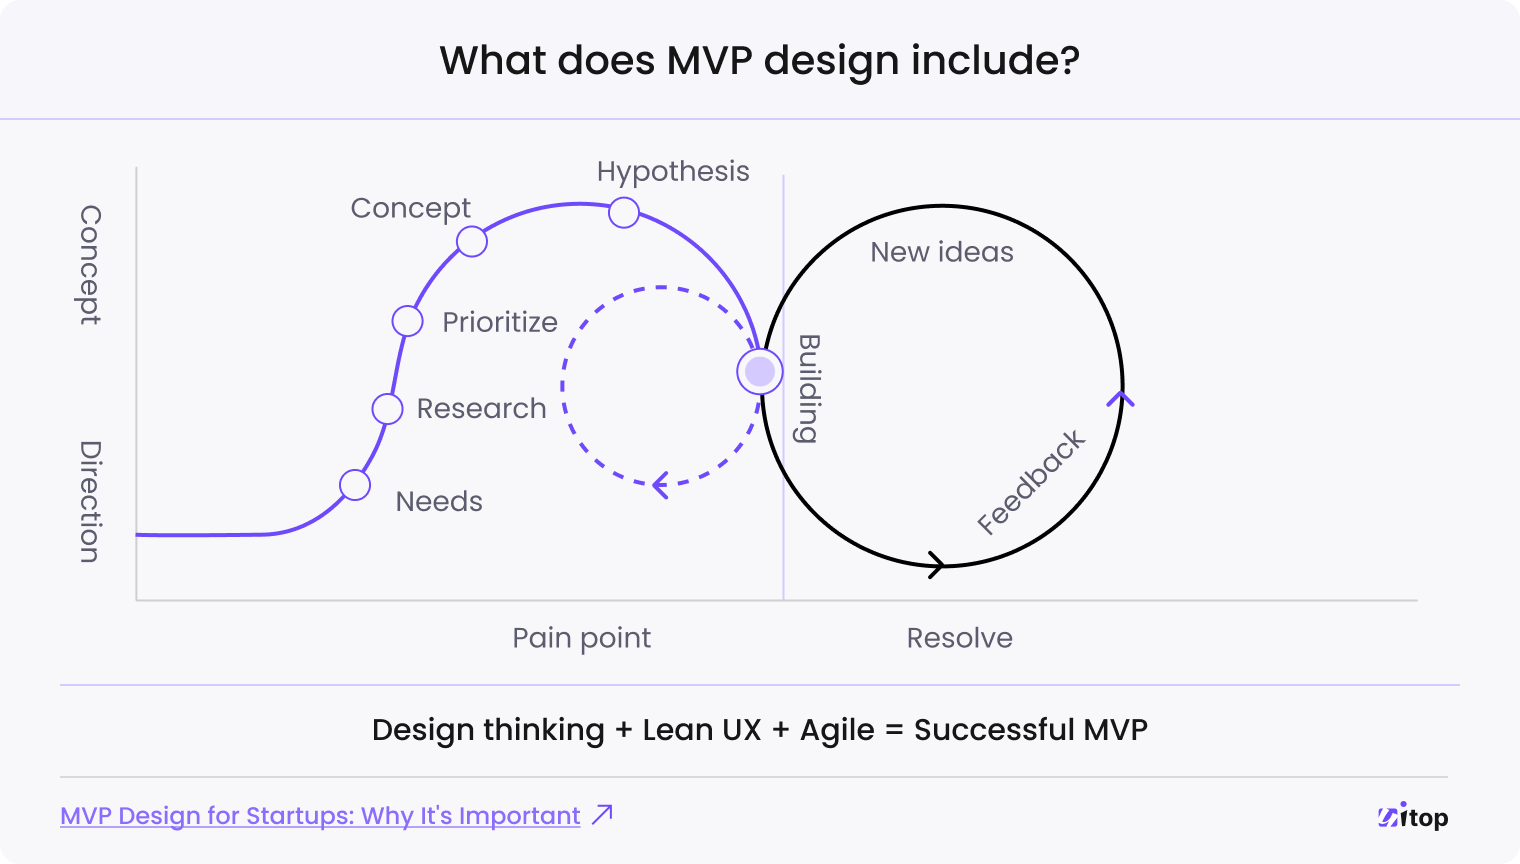 what does MVP design include?